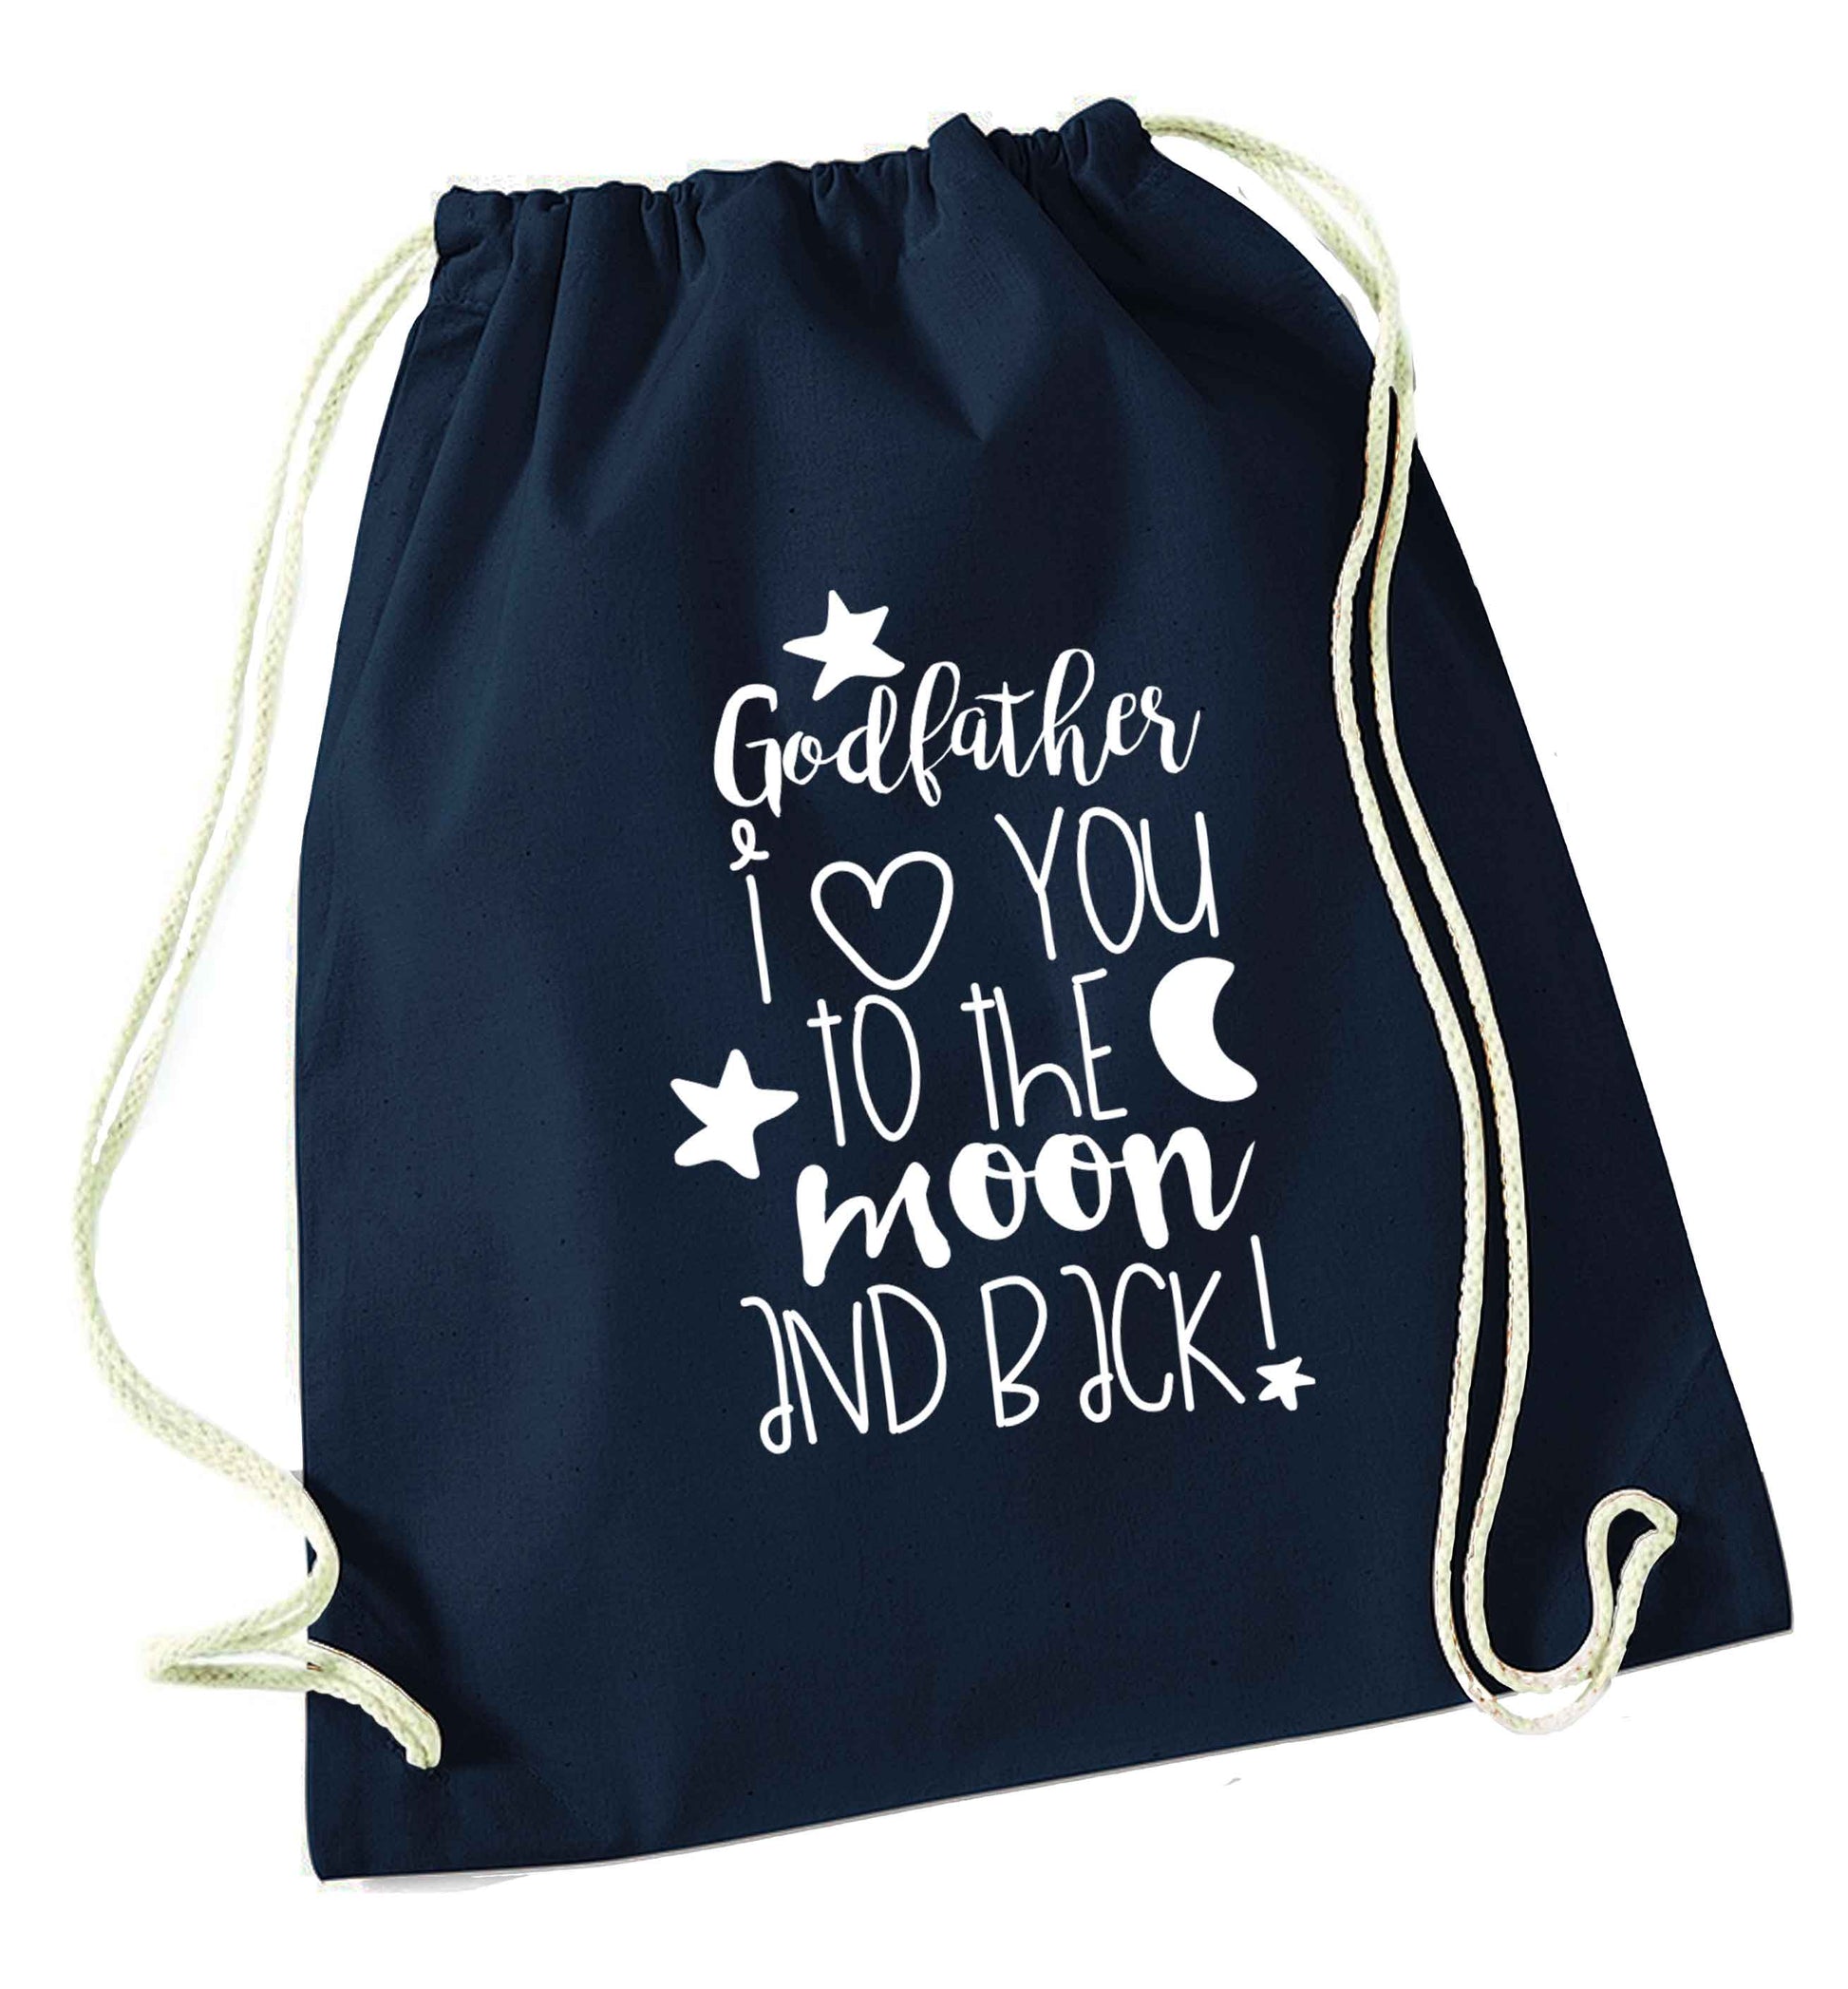 Godfather I love you to the moon and back navy drawstring bag